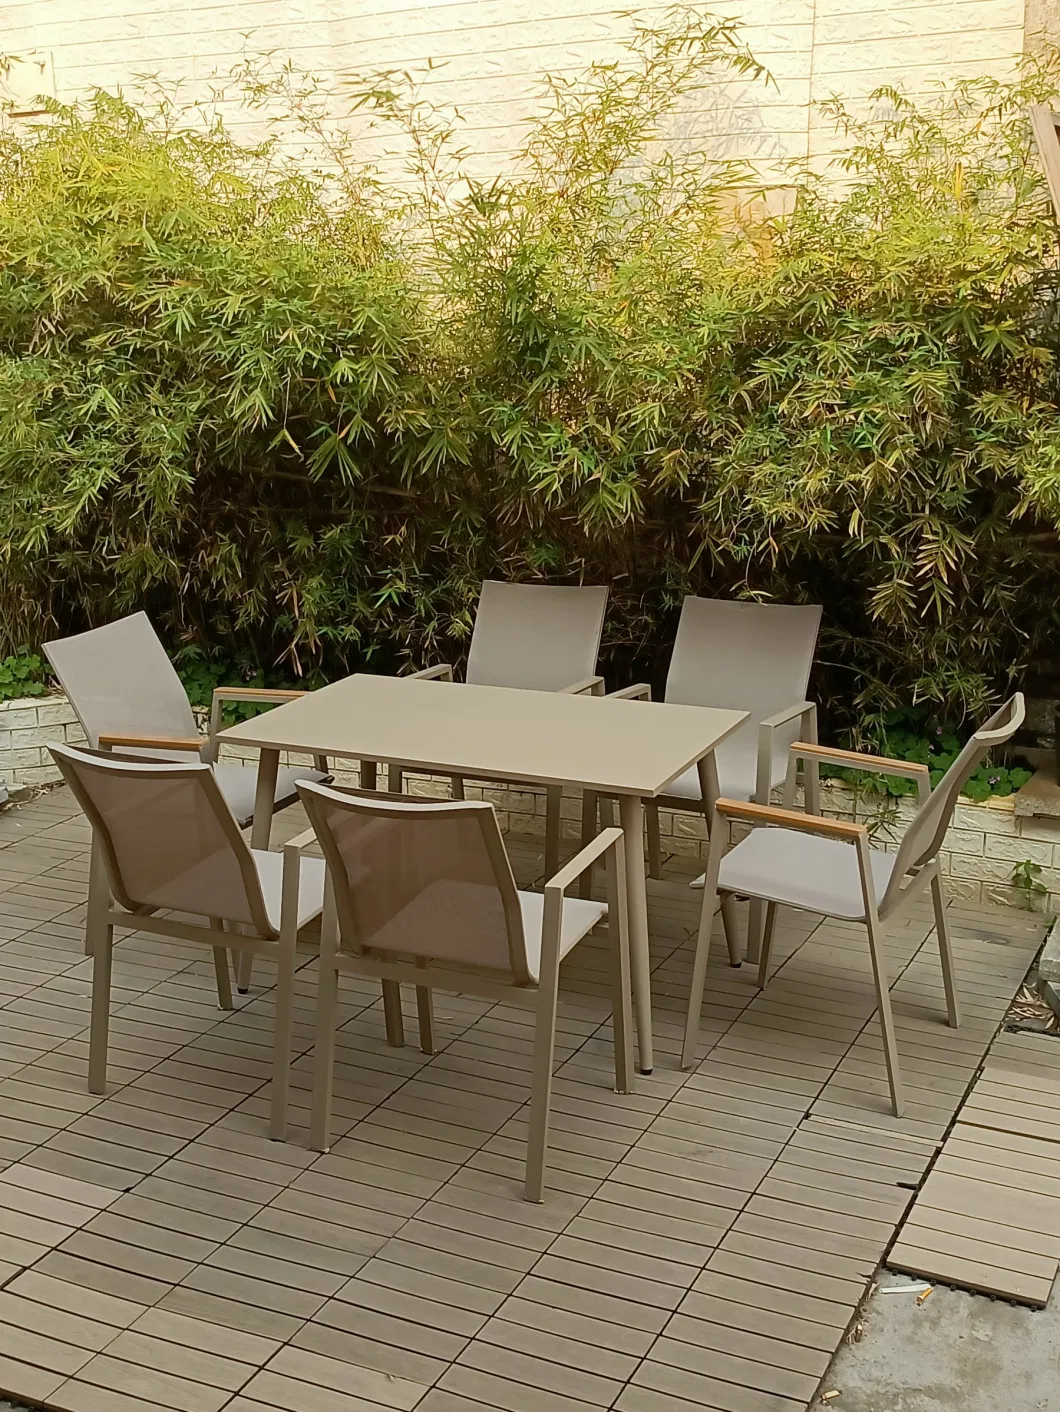 Popular Garden Furniture Patio Bistro Set Outdoor Cafe Restaurant Dining Waterproof Garden Terrace Woven Rope Table and Chairs